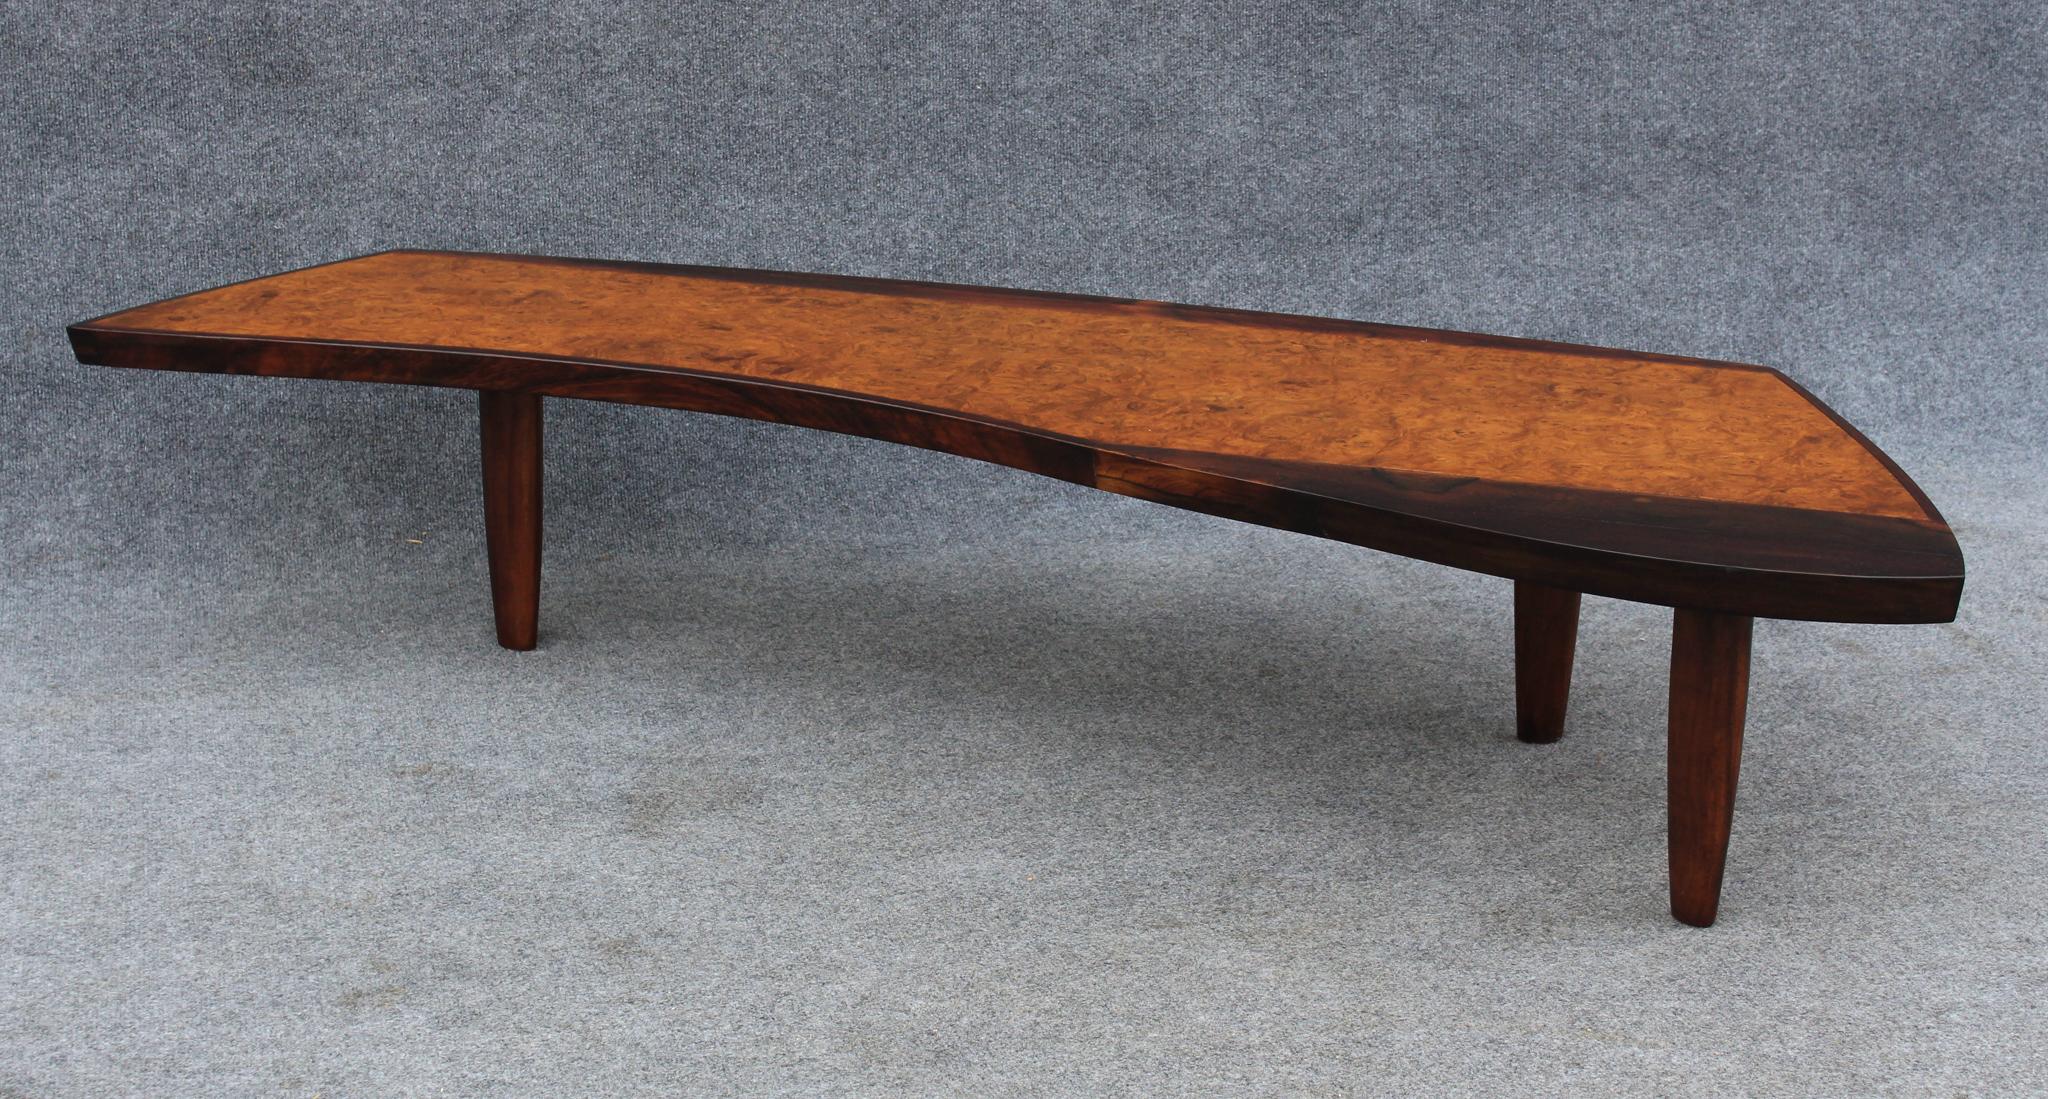 Designed by American icon George Nakahsima, this coffee table was made for Widdicomb. In the 1960s, Widdicomb allowed Nakashima design to reach more people with more attainable pricing compared to the hyper-exclusive custom one-off Studio pieces. As